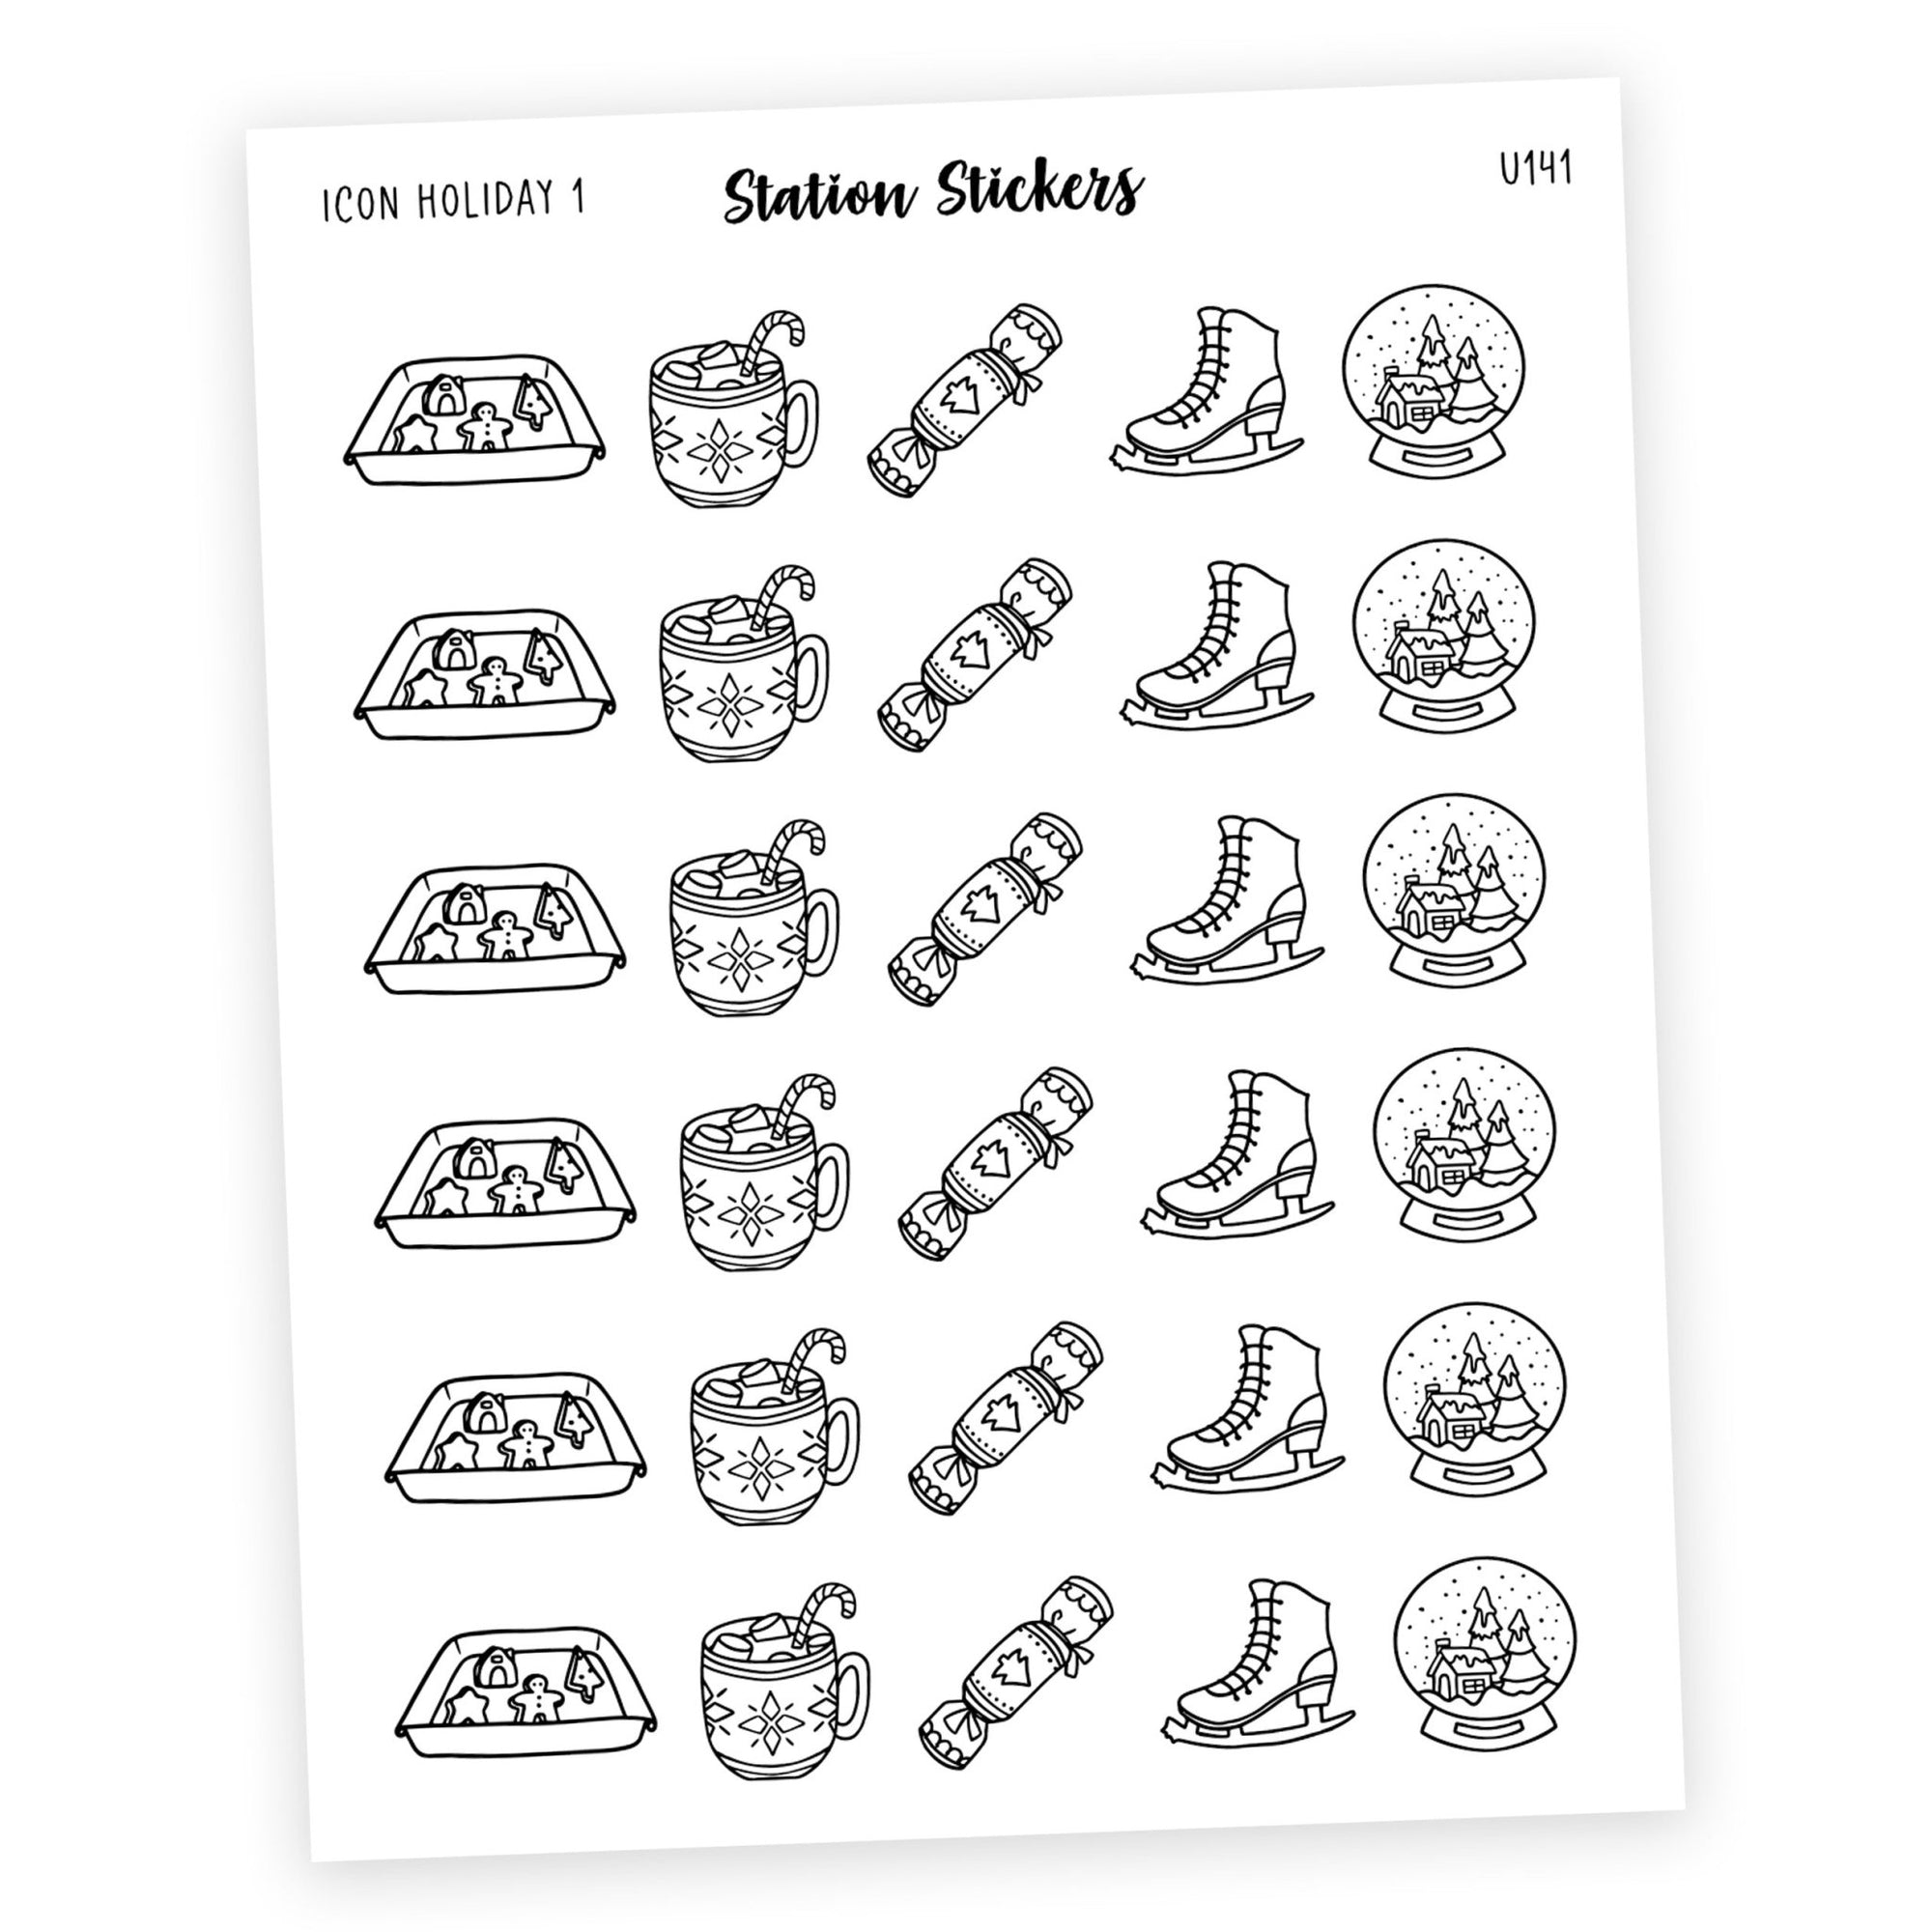 ICONS • HOLIDAY 1 - Station Stickers